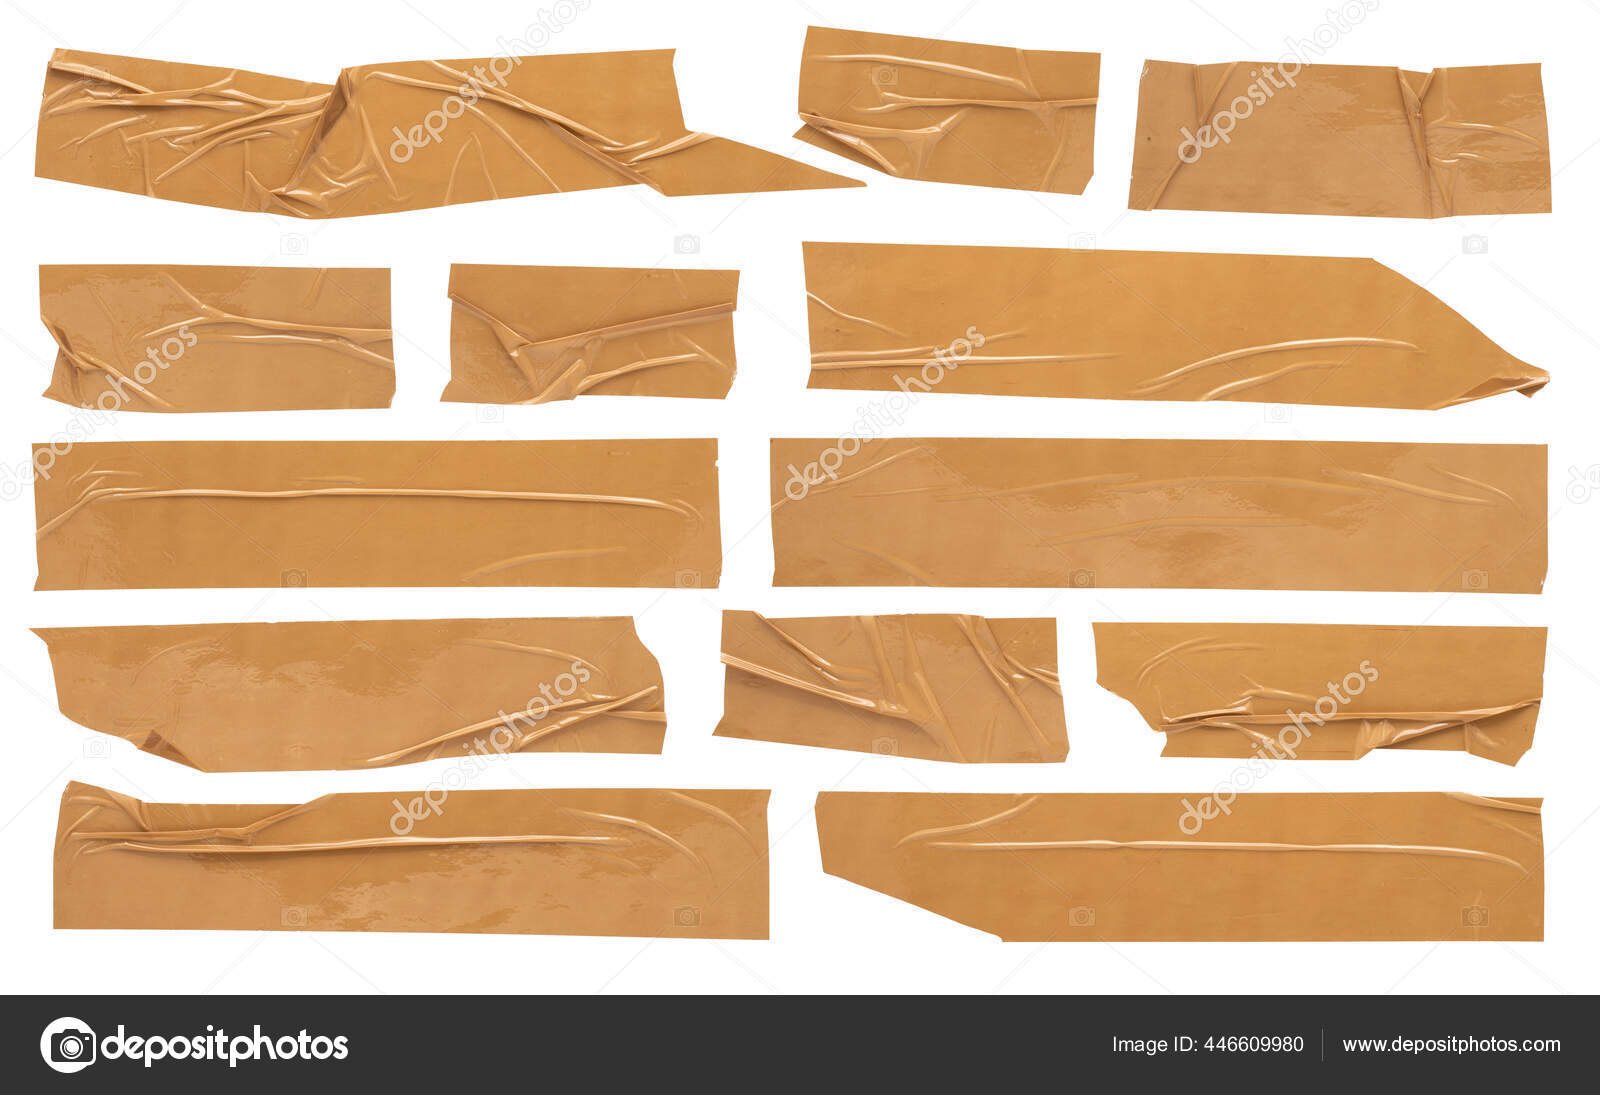 Beige Adhesive Tape Set Crumpled Torn Pieces Sticky Brown Tape Stock Photo  by ©martinova4 446609980